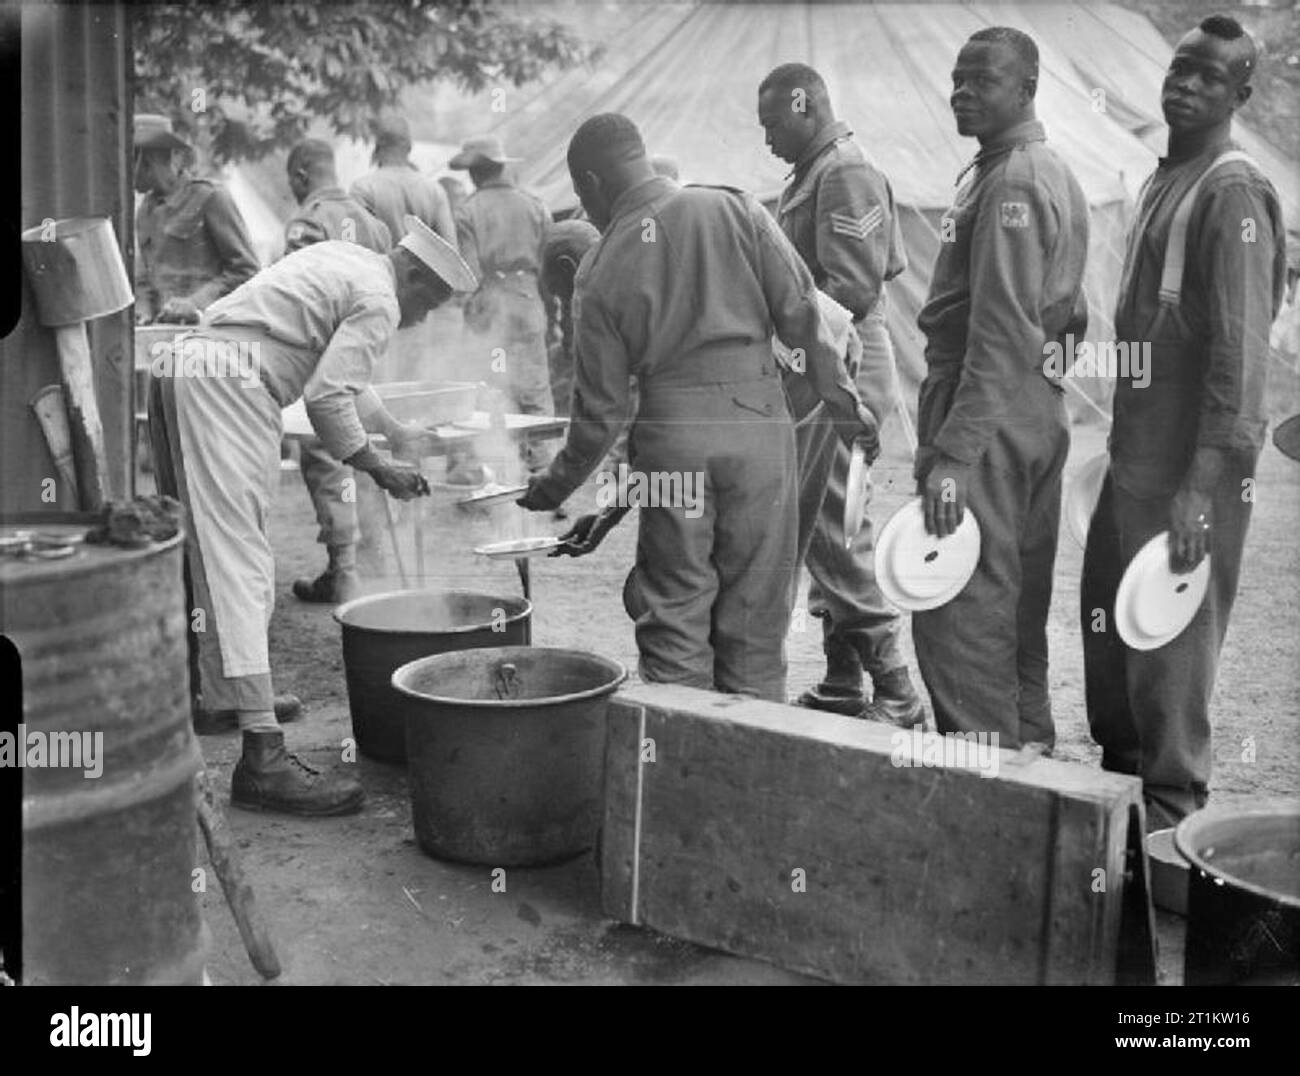 Victory Marchers Camp in London- Accommodation in Kensington Gardens, London, England, UK, 1946 Men of various African regiments queue up for their lunchtime meal at their tented camp in Kensington Gardens, London. Stock Photo